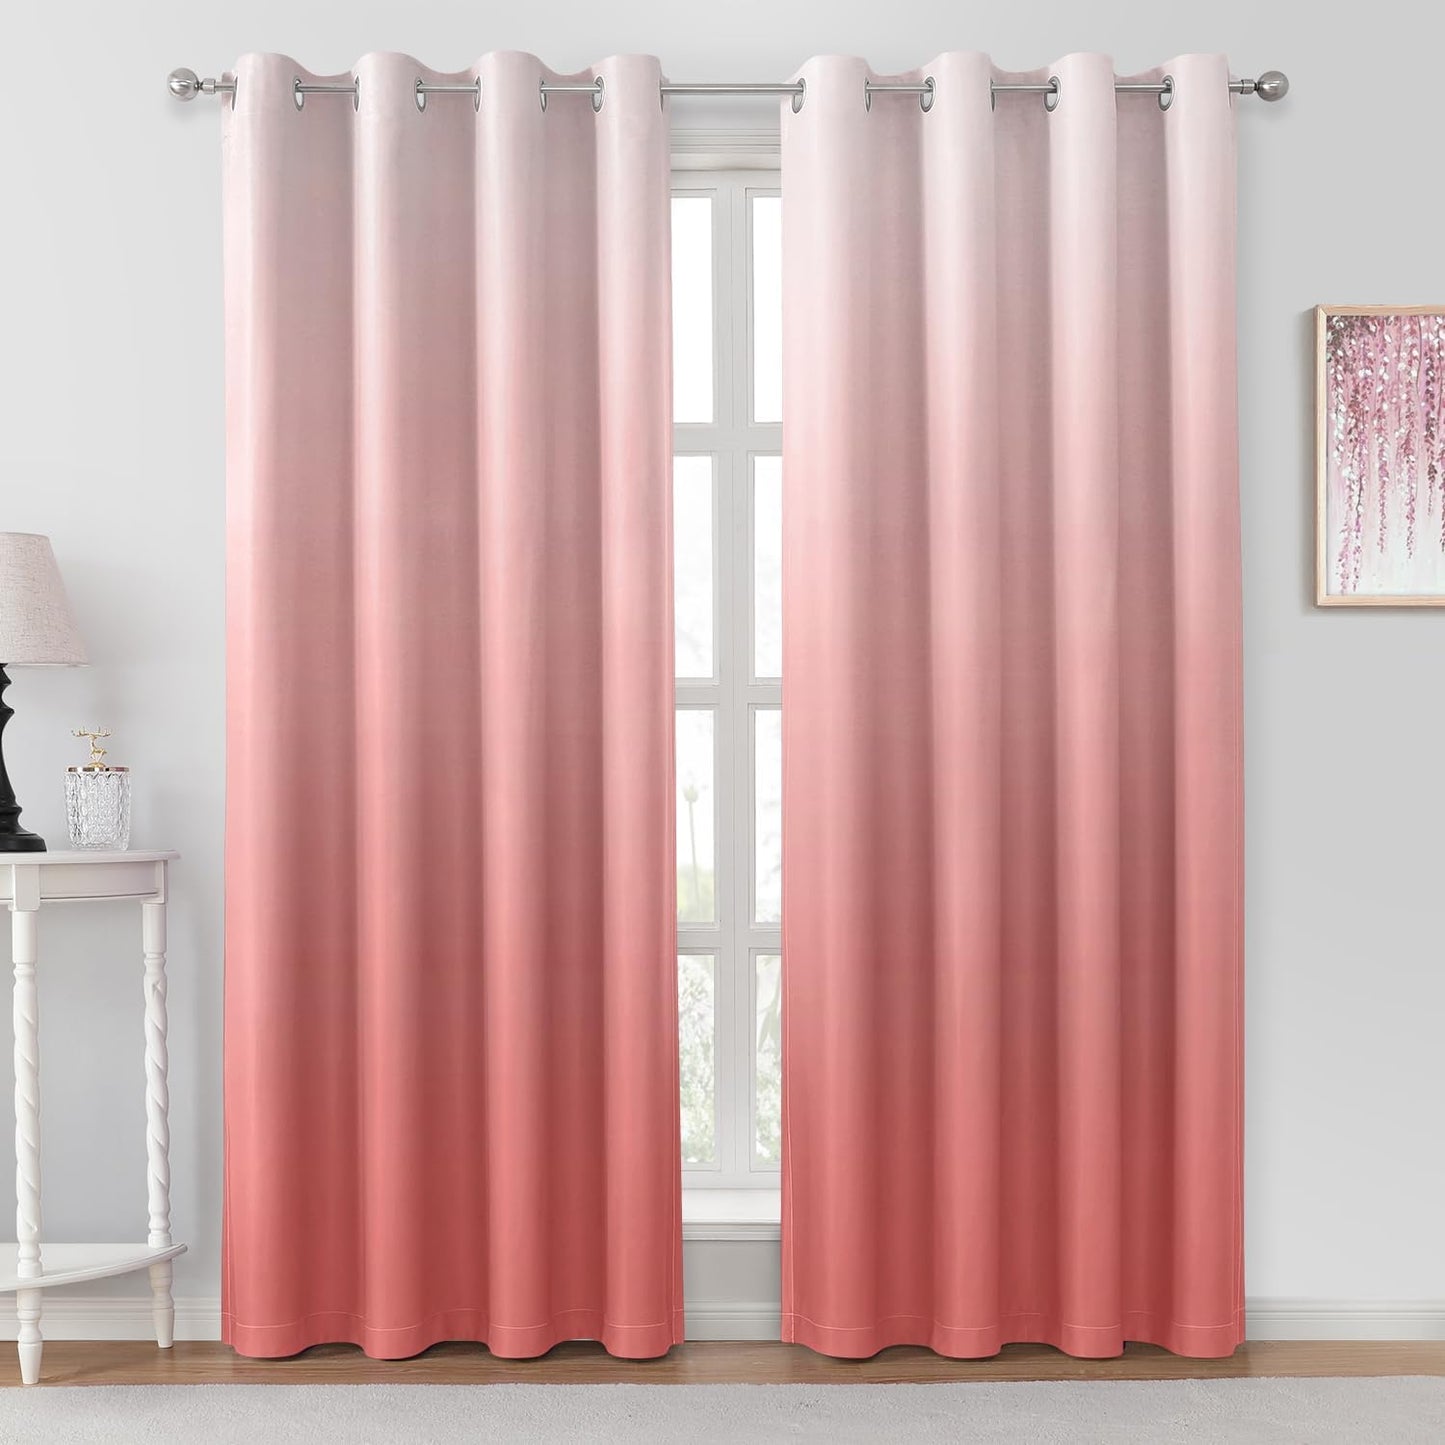 HOMEIDEAS Navy Blue Ombre Blackout Curtains 52 X 84 Inch Length Gradient Room Darkening Thermal Insulated Energy Saving Grommet 2 Panels Window Drapes for Living Room/Bedroom  HOMEIDEAS Coral Pink 52"W X 96"L 